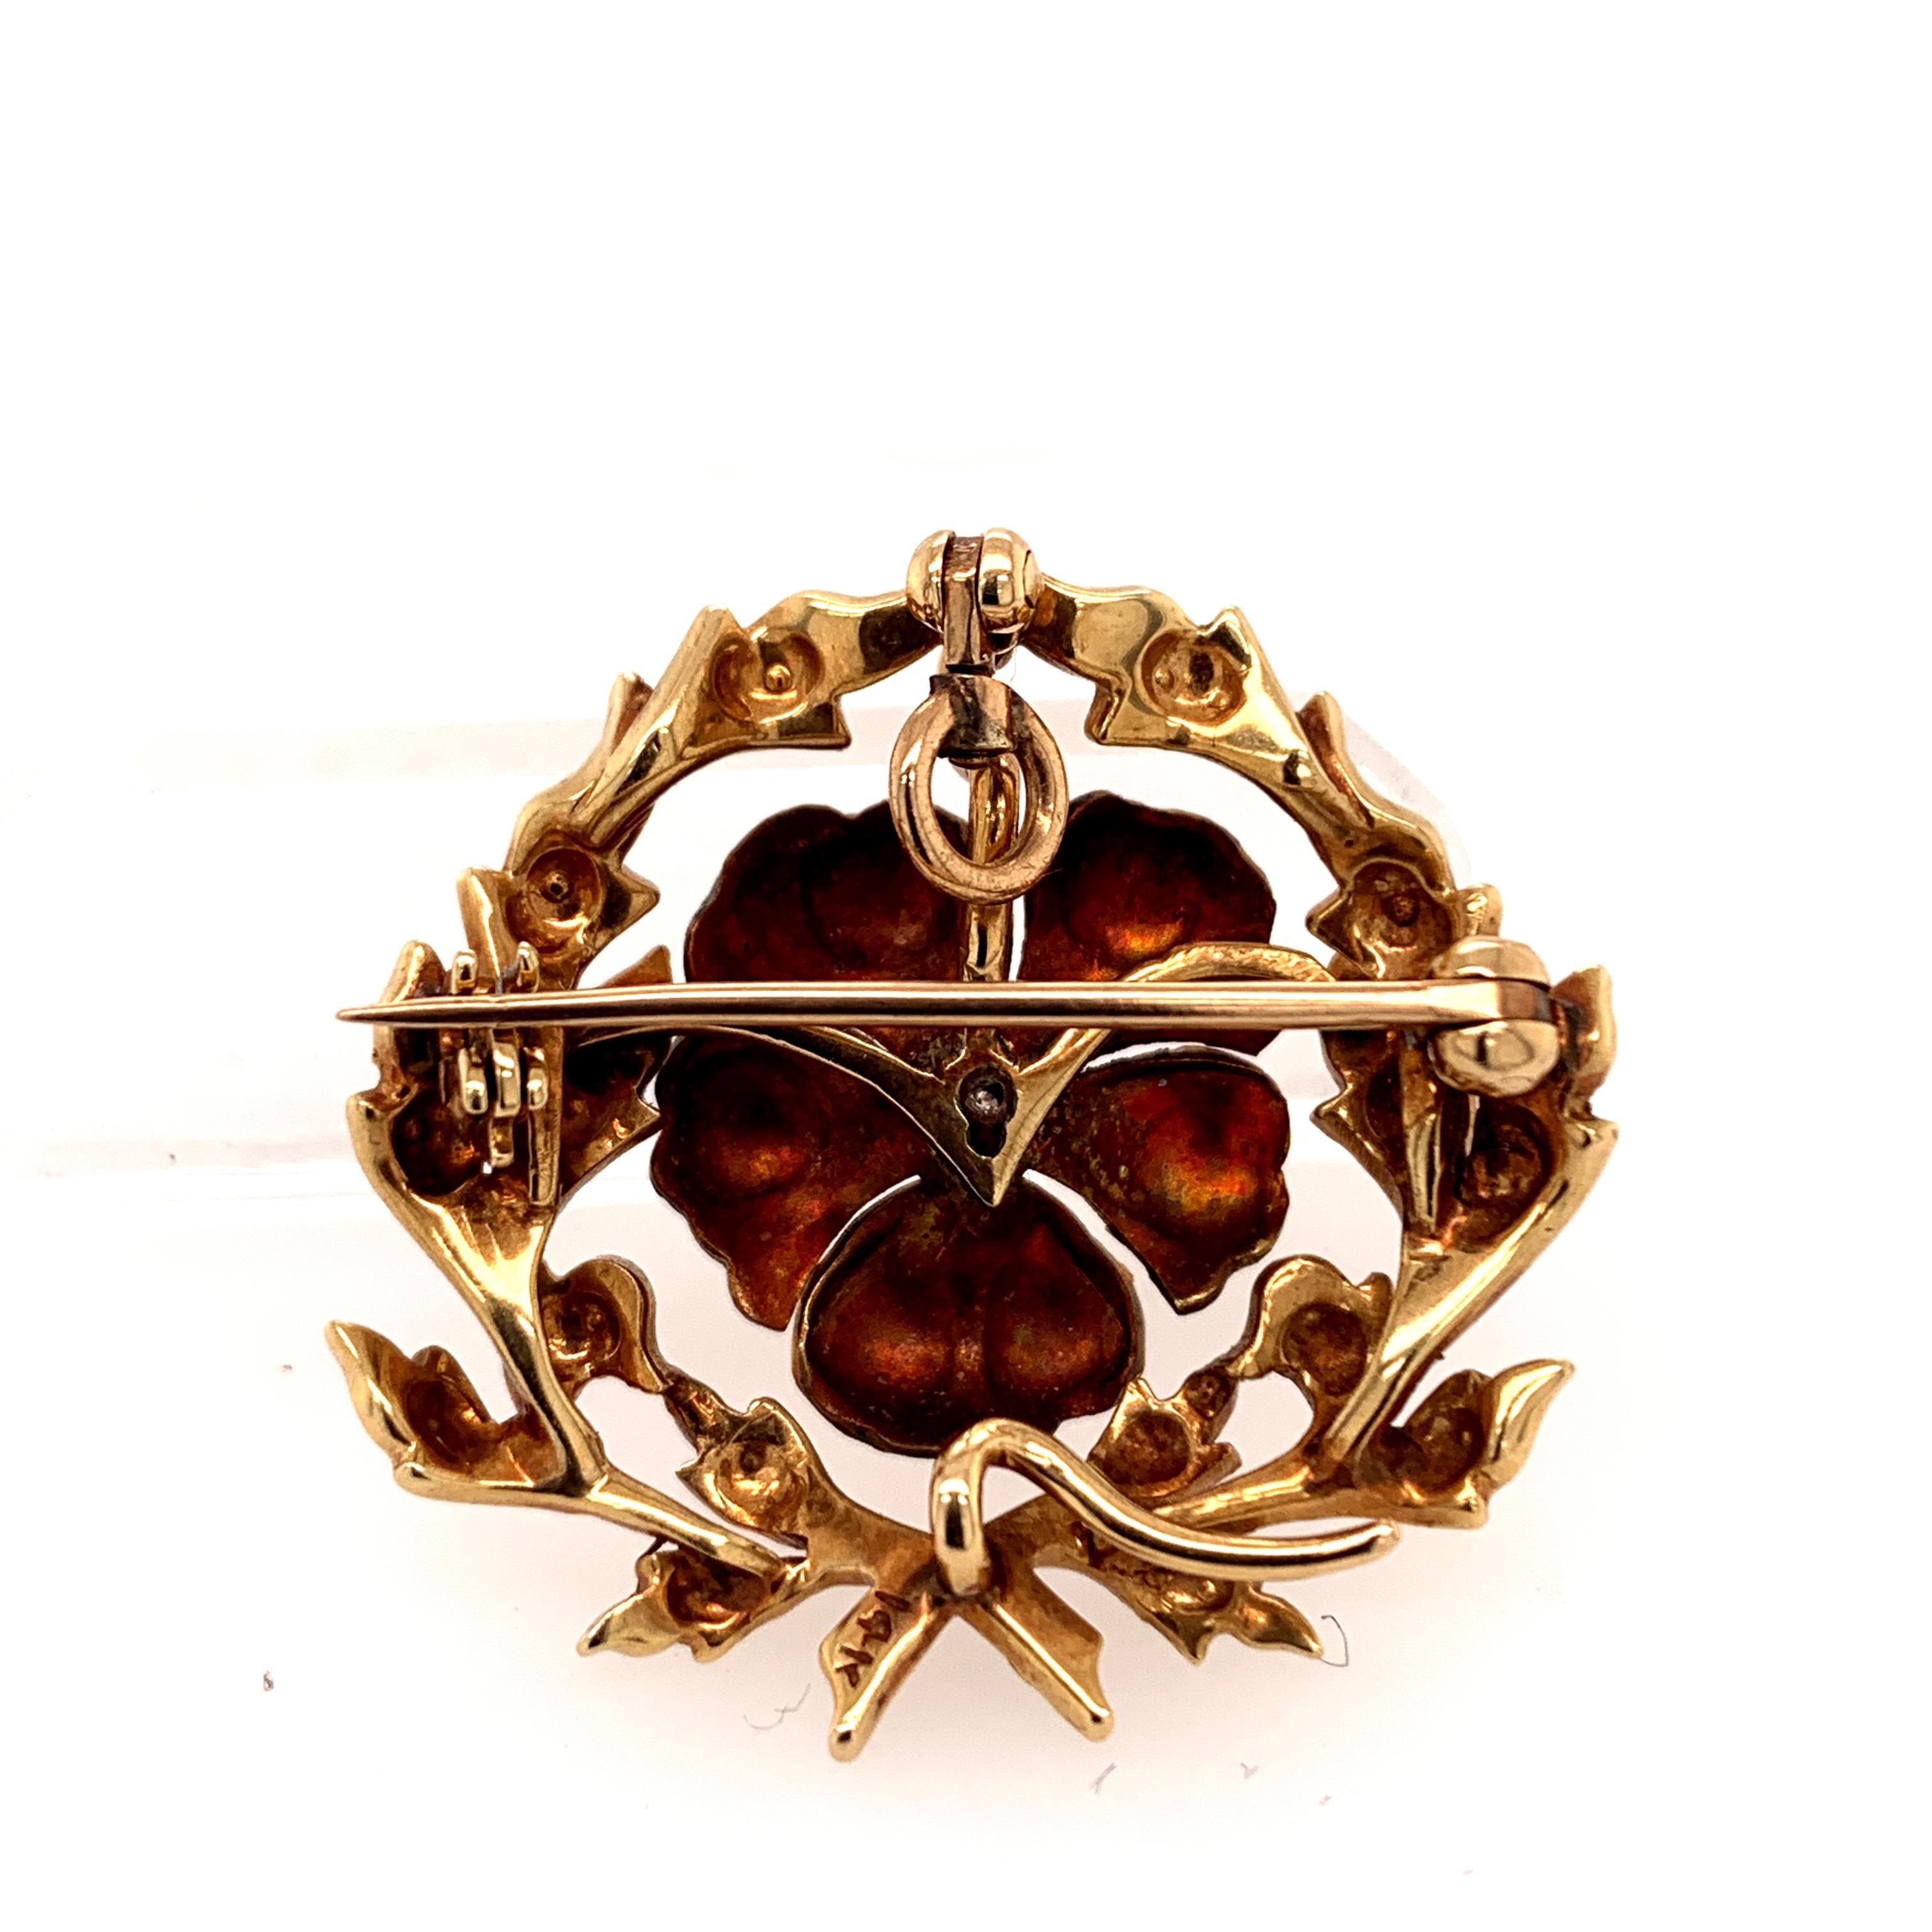 Very fine antique pansy pin/drop.  The center is a figural 